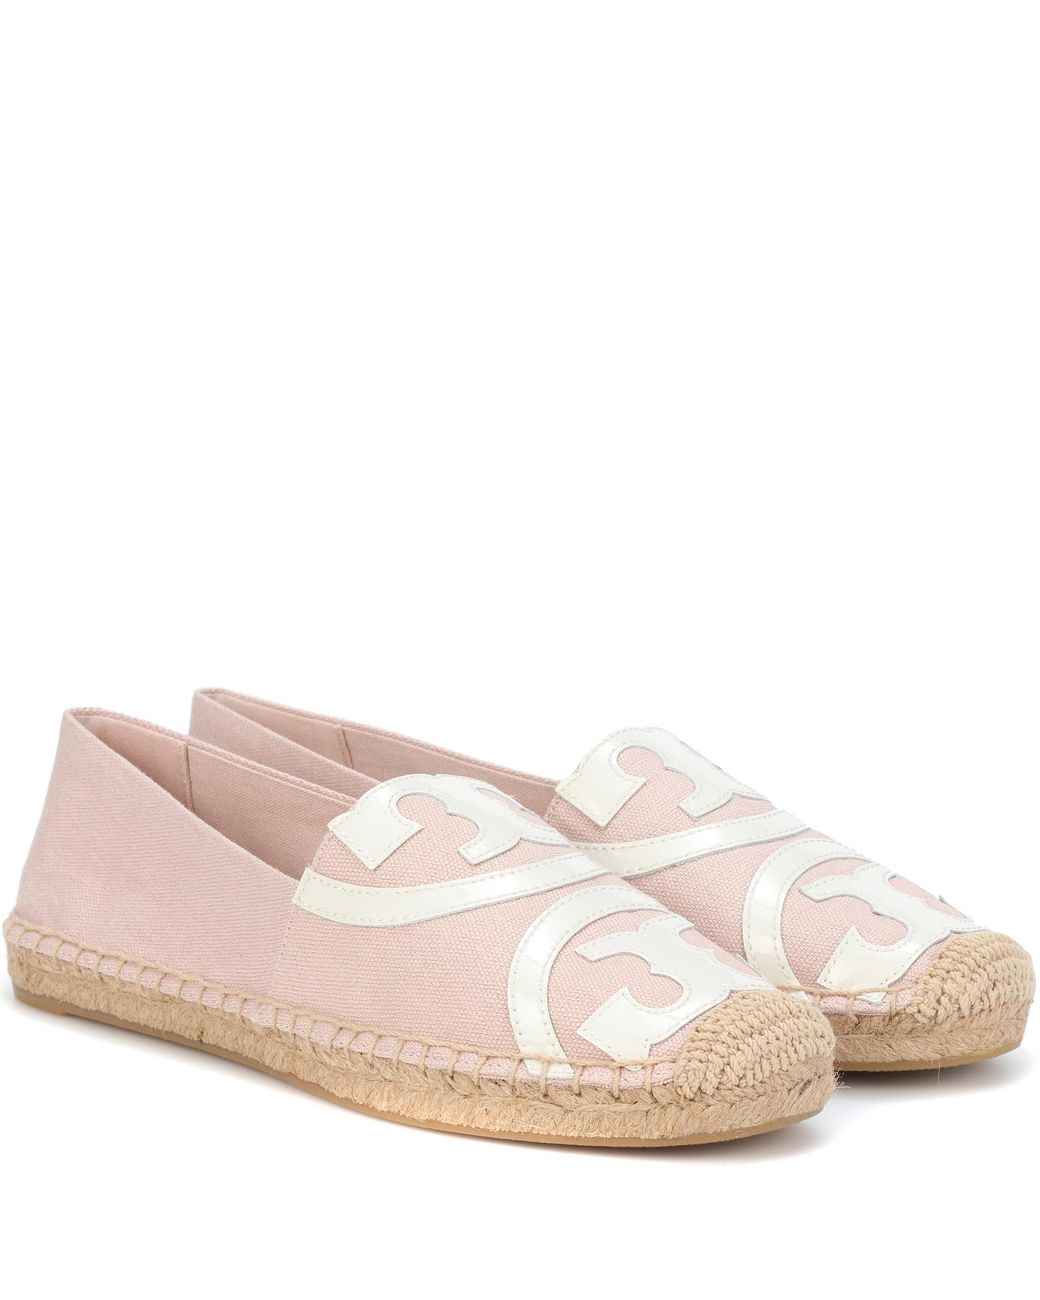 Tory Burch Poppy Leather-trimmed Espadrille in Pink | Lyst